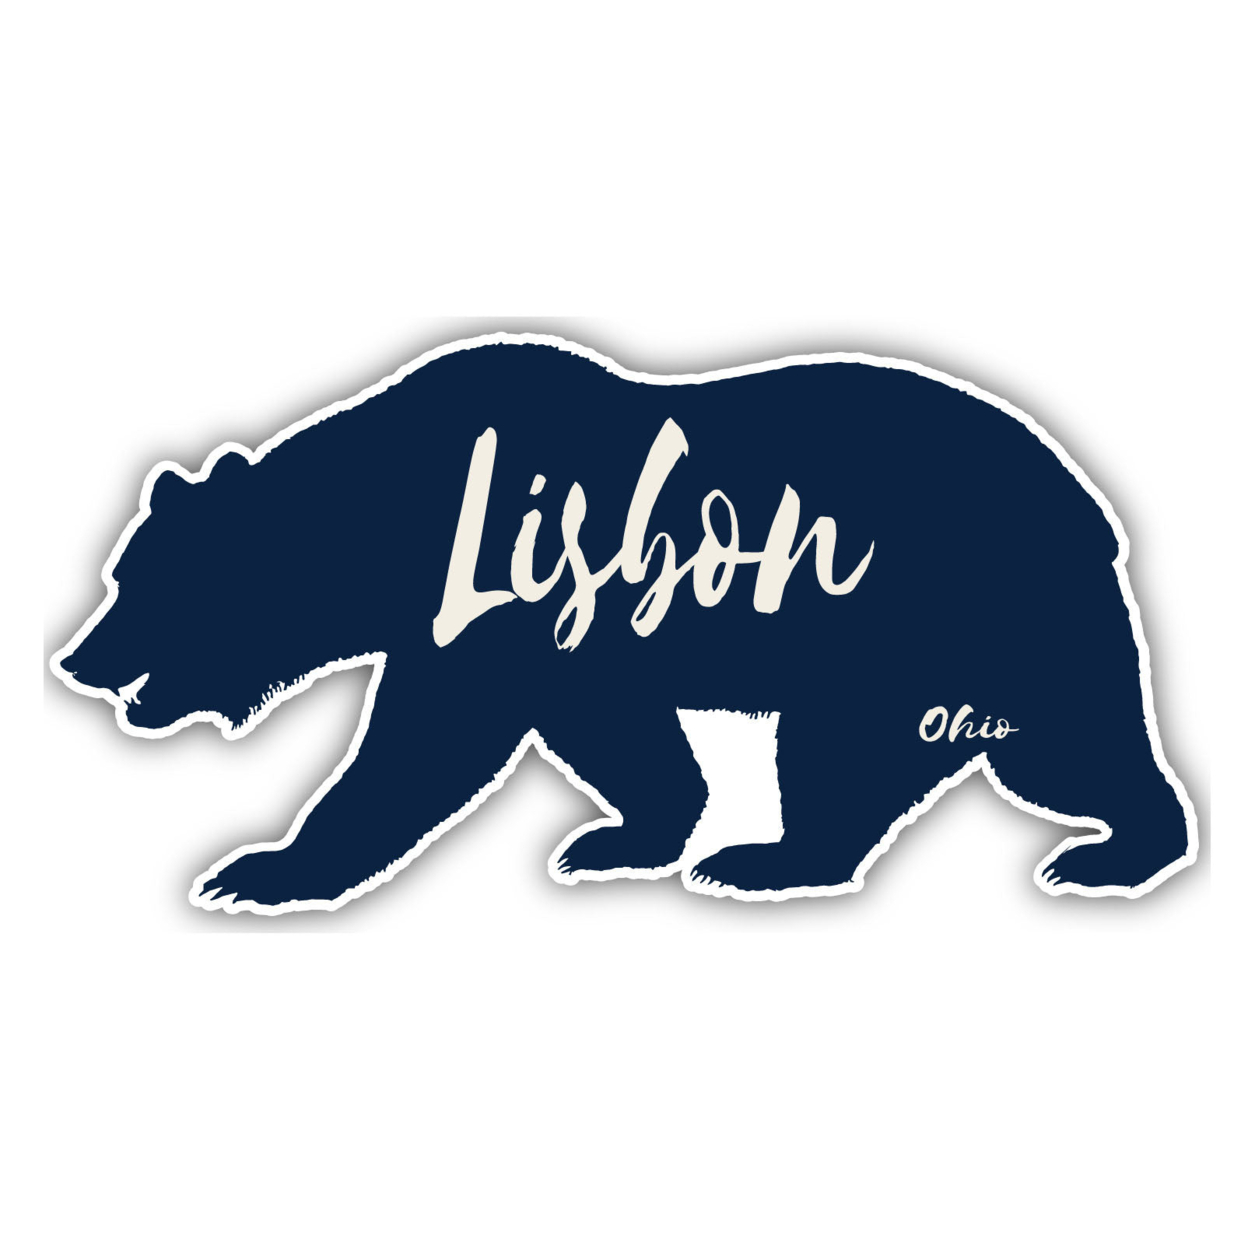 Lisbon Ohio Souvenir Decorative Stickers (Choose Theme And Size) - 4-Inch, Great Outdoors